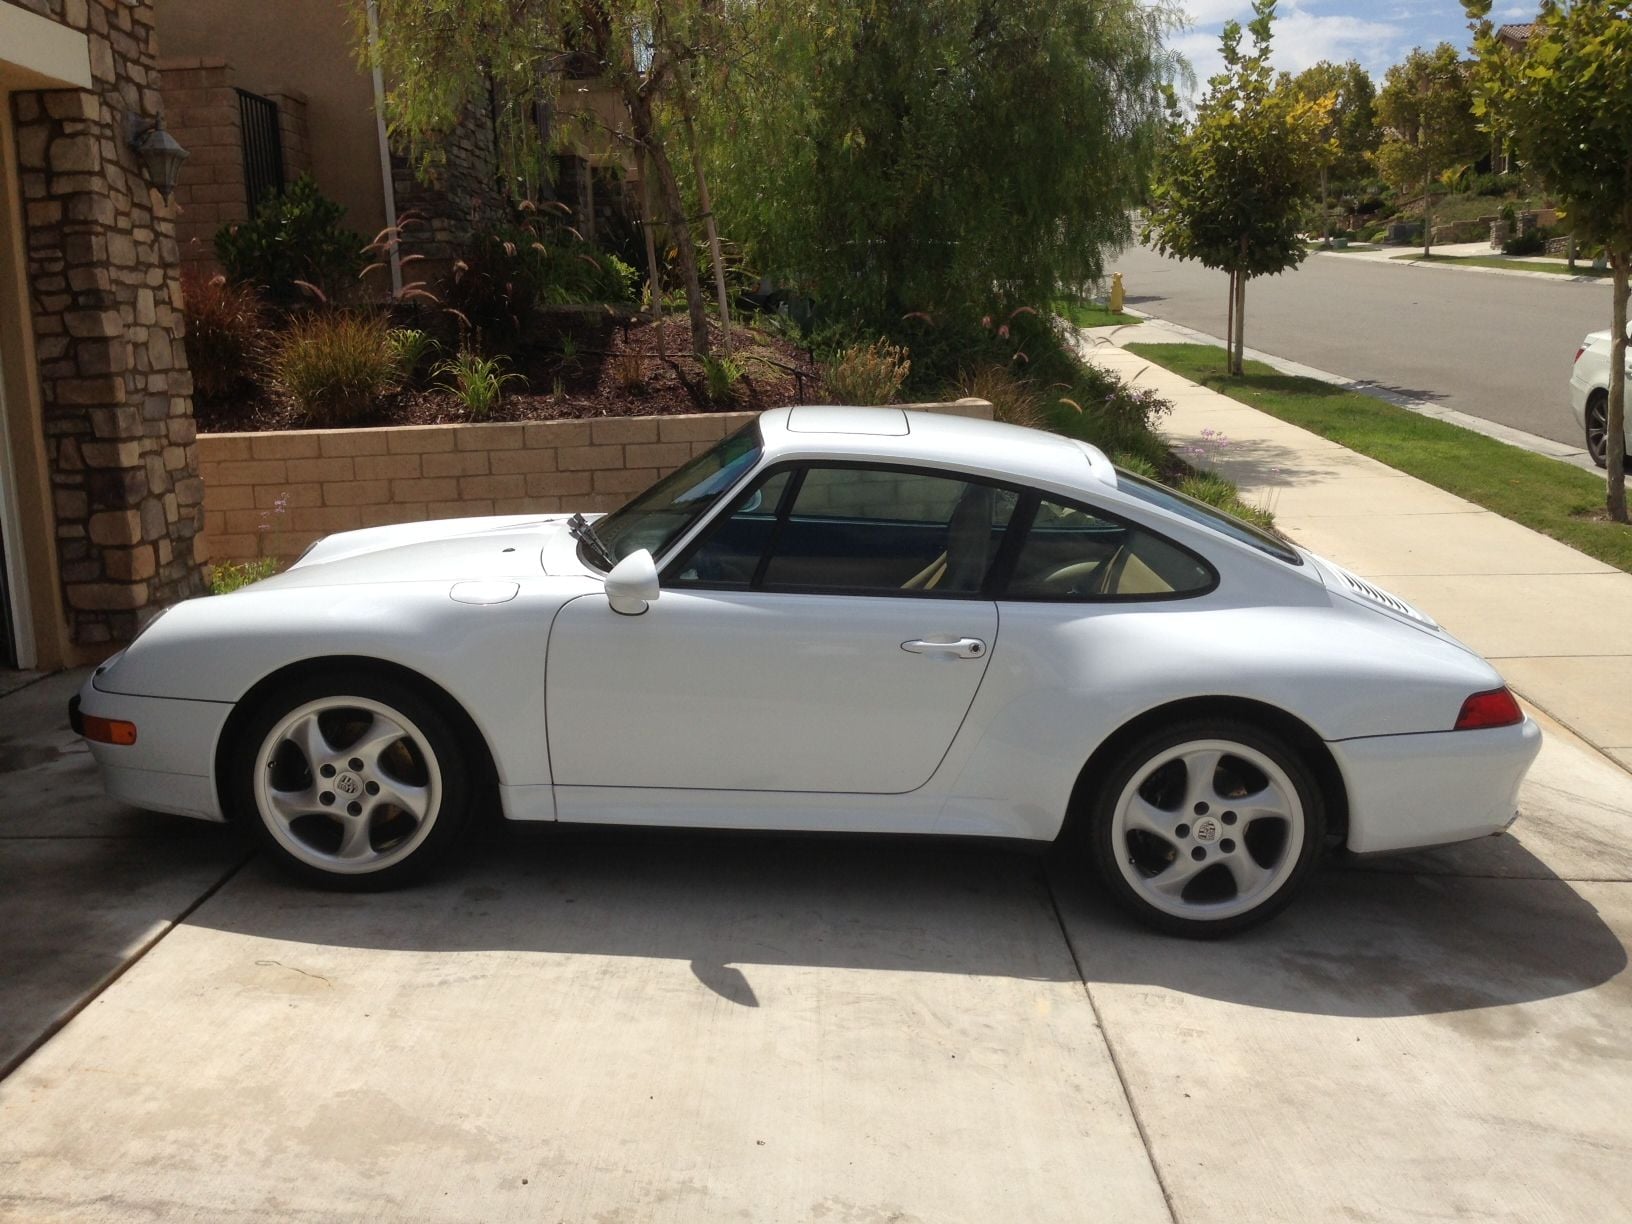 1998 Porsche 911 - 1998 C2S 993 - 6 Speed - Used - VIN WP0AA2998WS320095 - 123,000 Miles - 6 cyl - 2WD - Manual - Coupe - White - Corona, CA 92883, United States